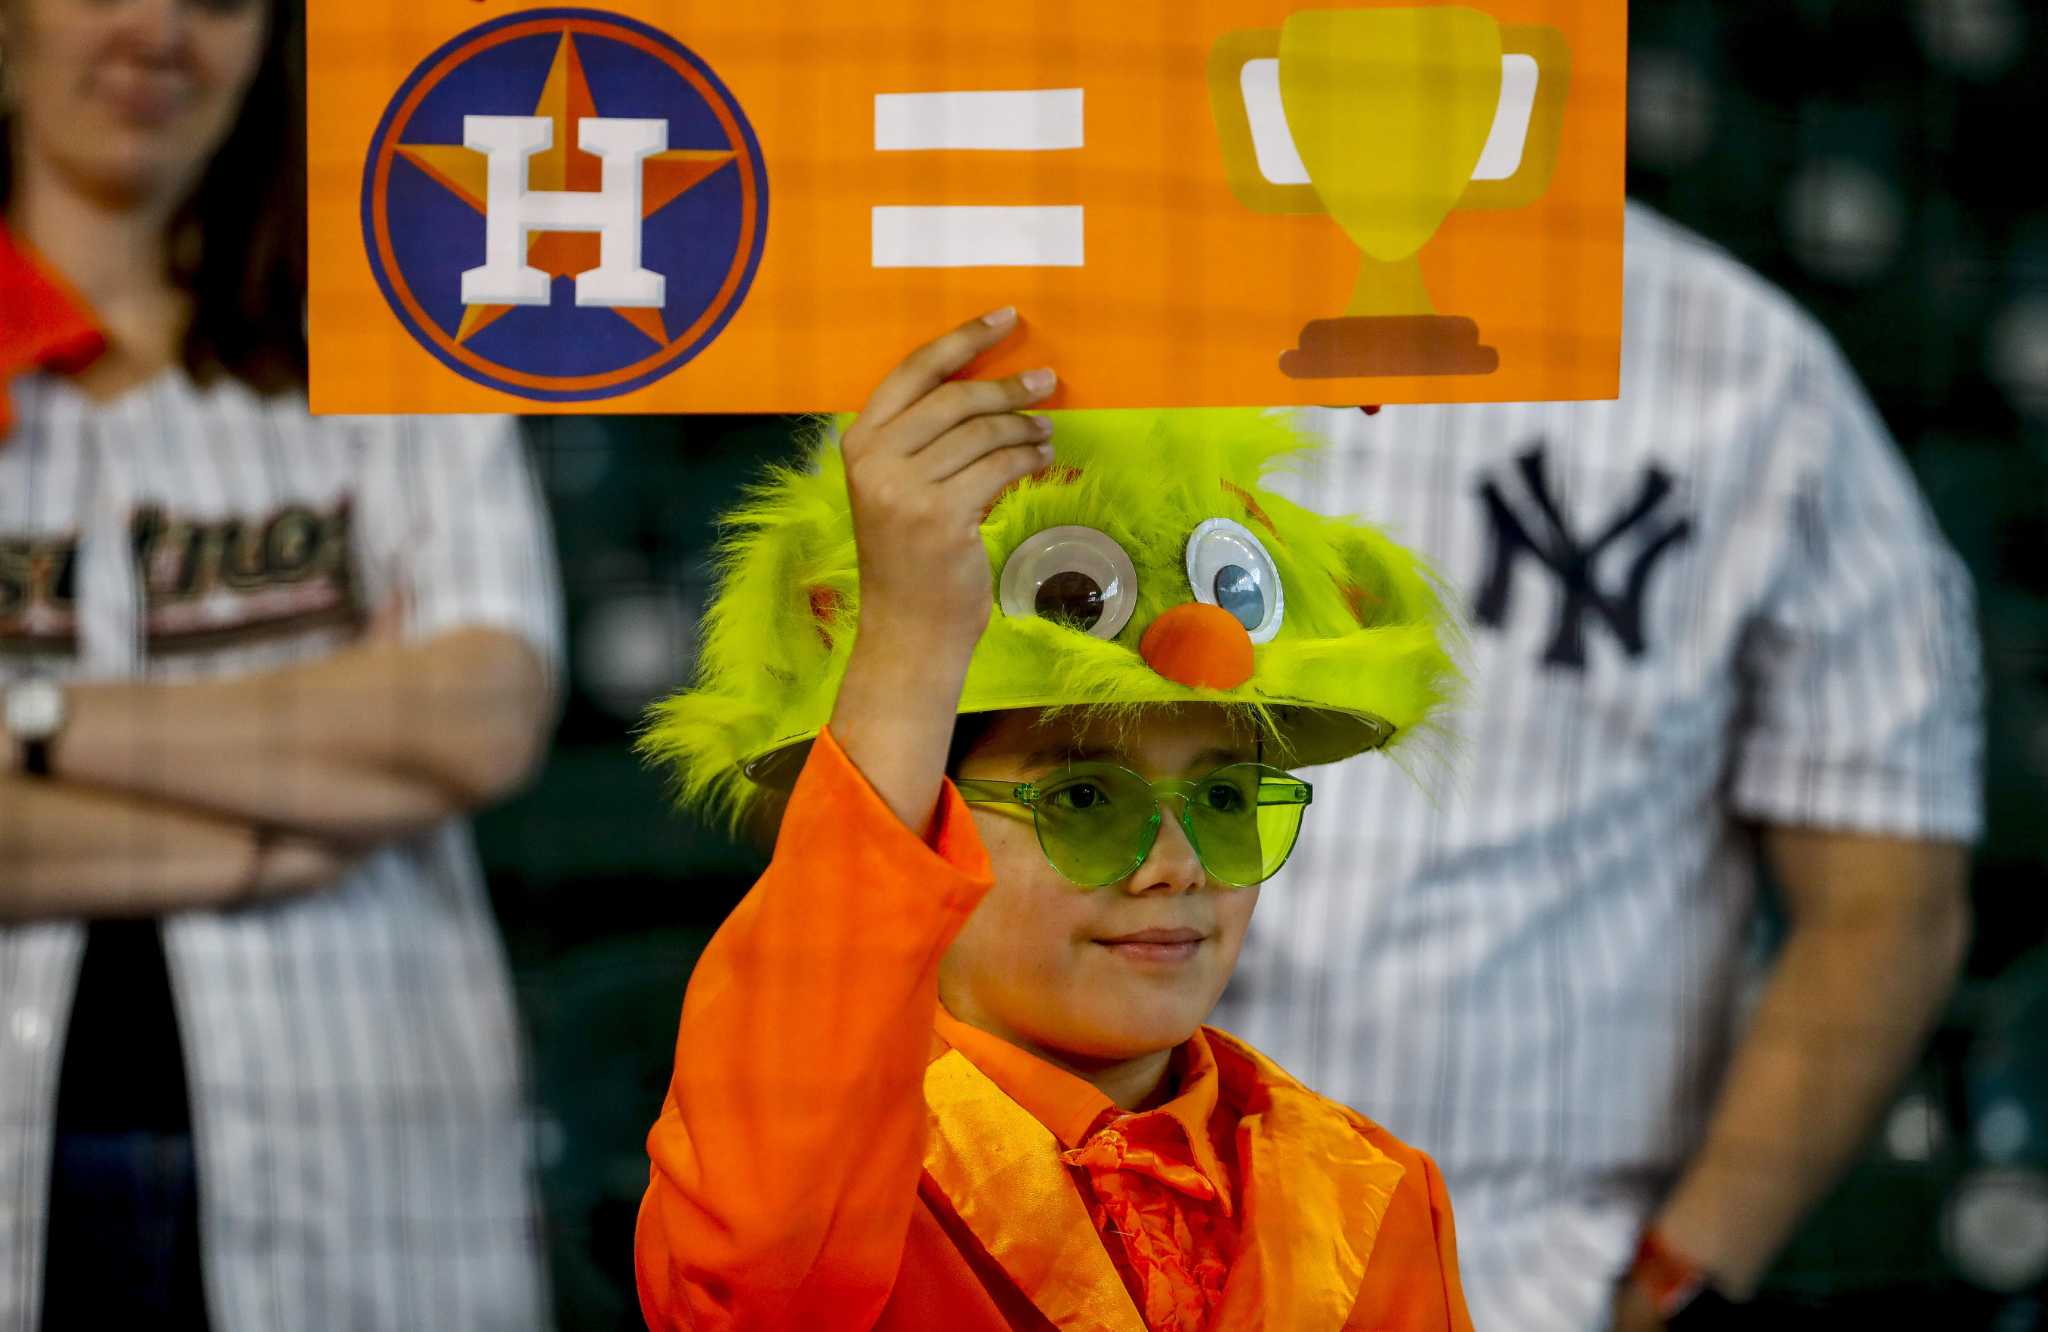 Superstitious? Houston Astros fans reveal their superstitions